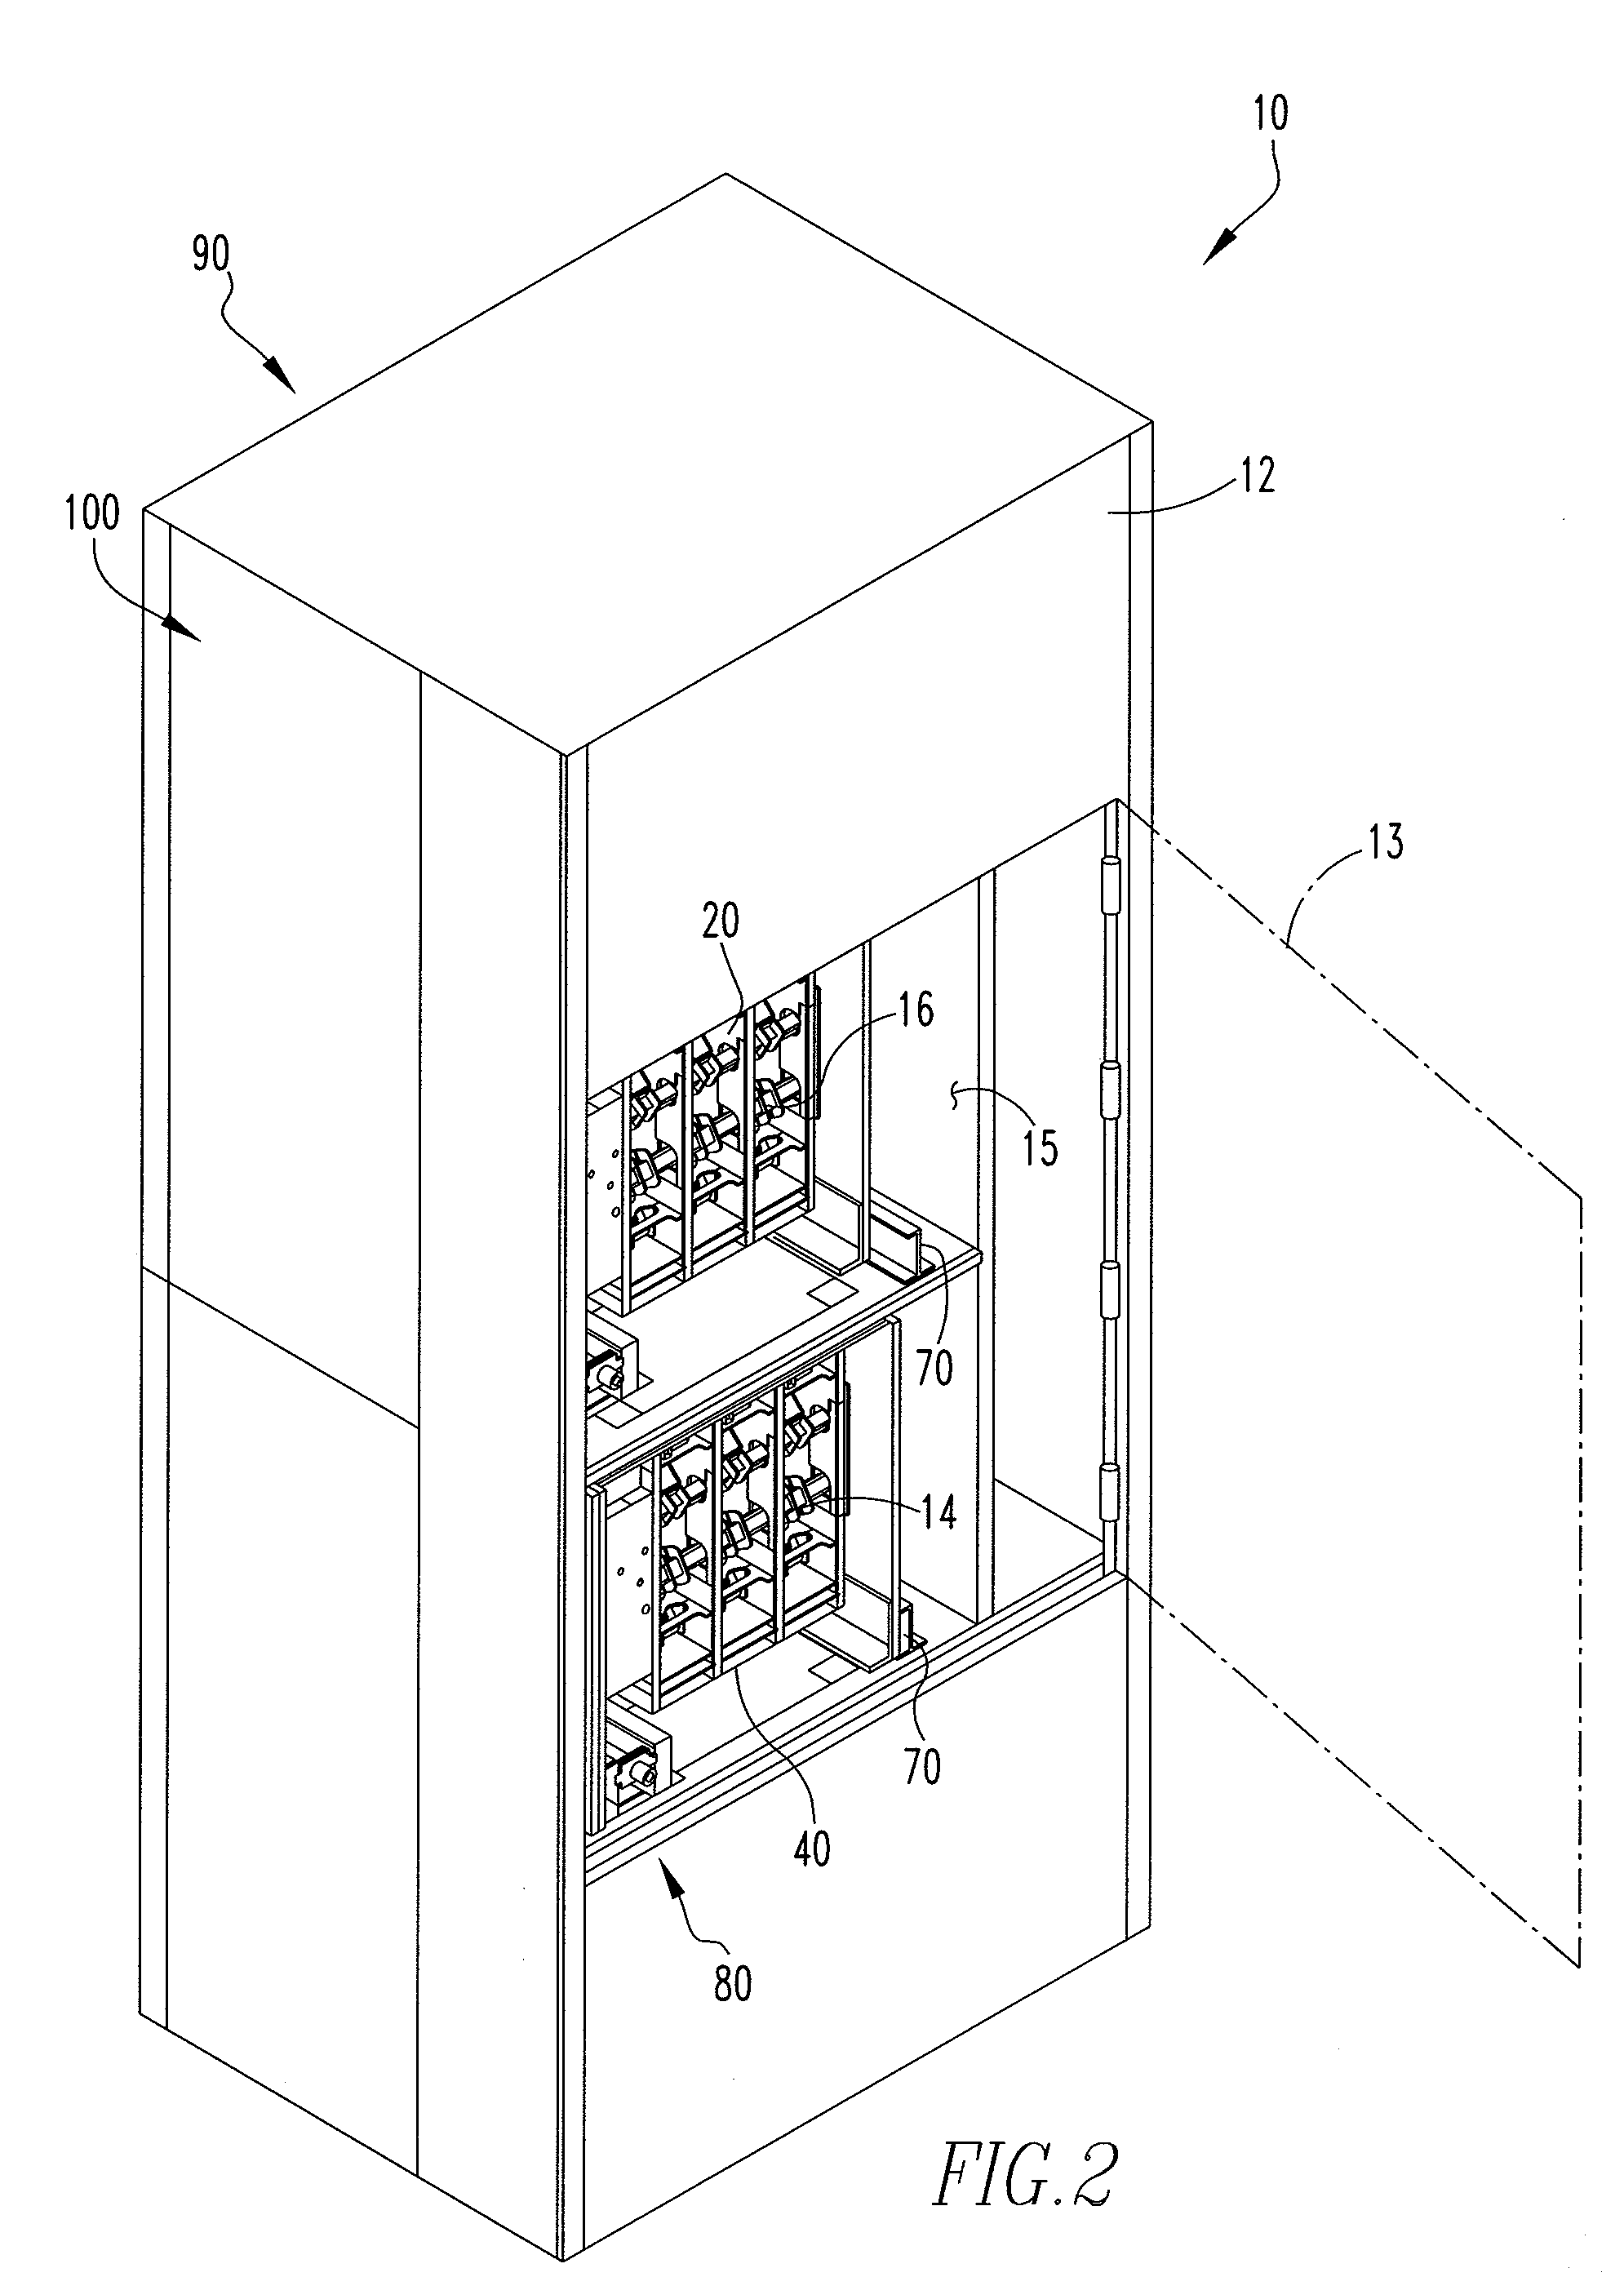 Closed transition automatic transfer switch assembly and associated method